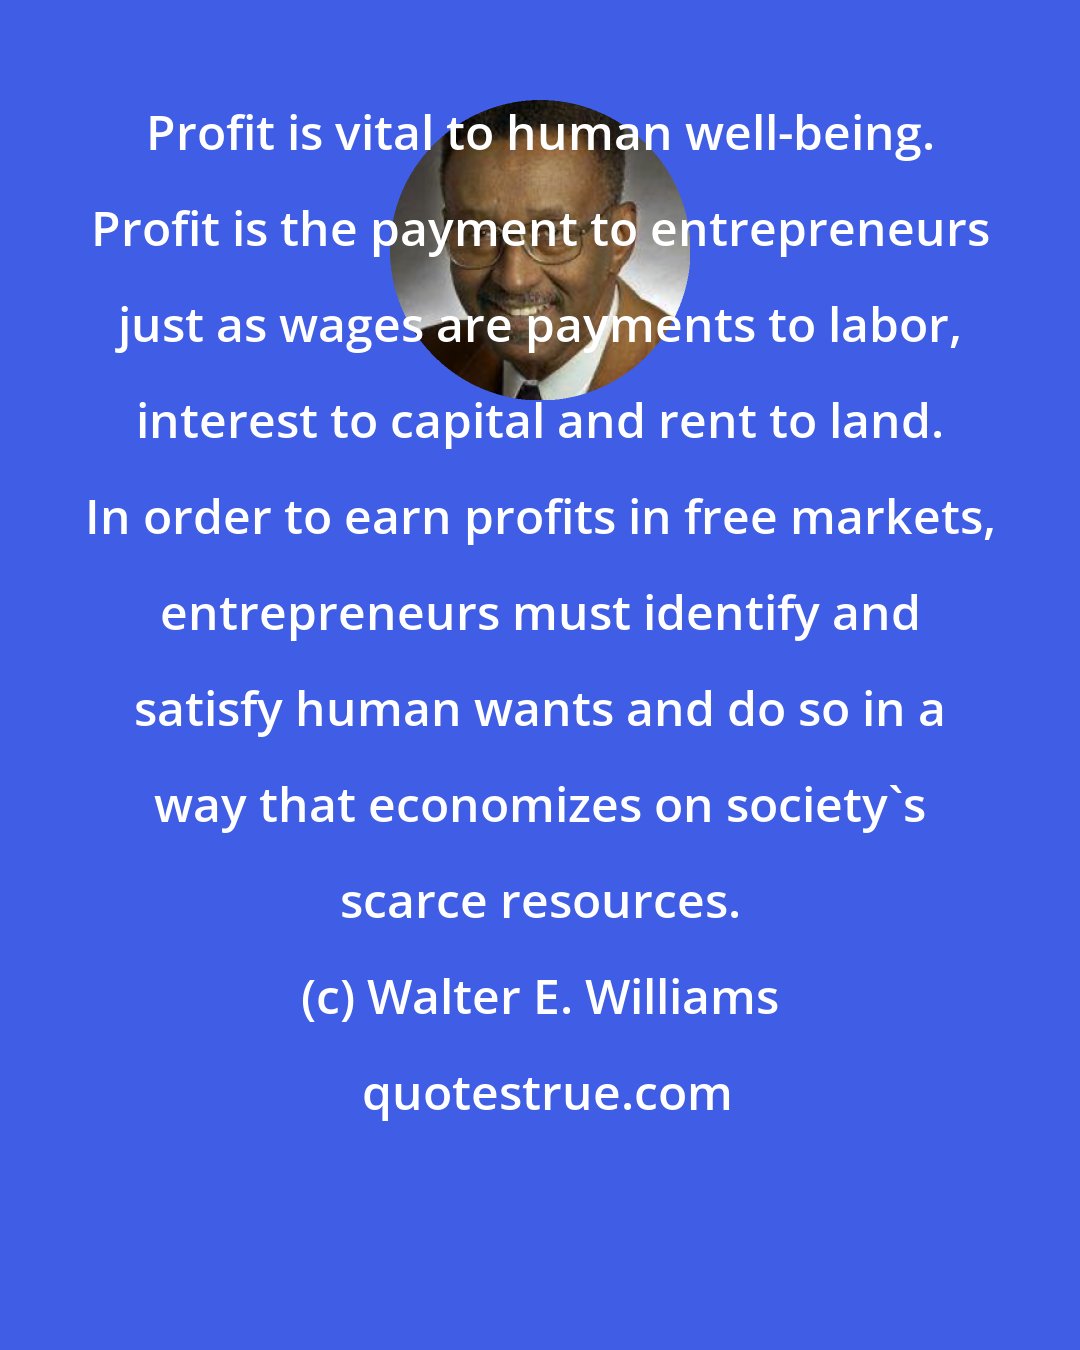 Walter E. Williams: Profit is vital to human well-being. Profit is the payment to entrepreneurs just as wages are payments to labor, interest to capital and rent to land. In order to earn profits in free markets, entrepreneurs must identify and satisfy human wants and do so in a way that economizes on society's scarce resources.